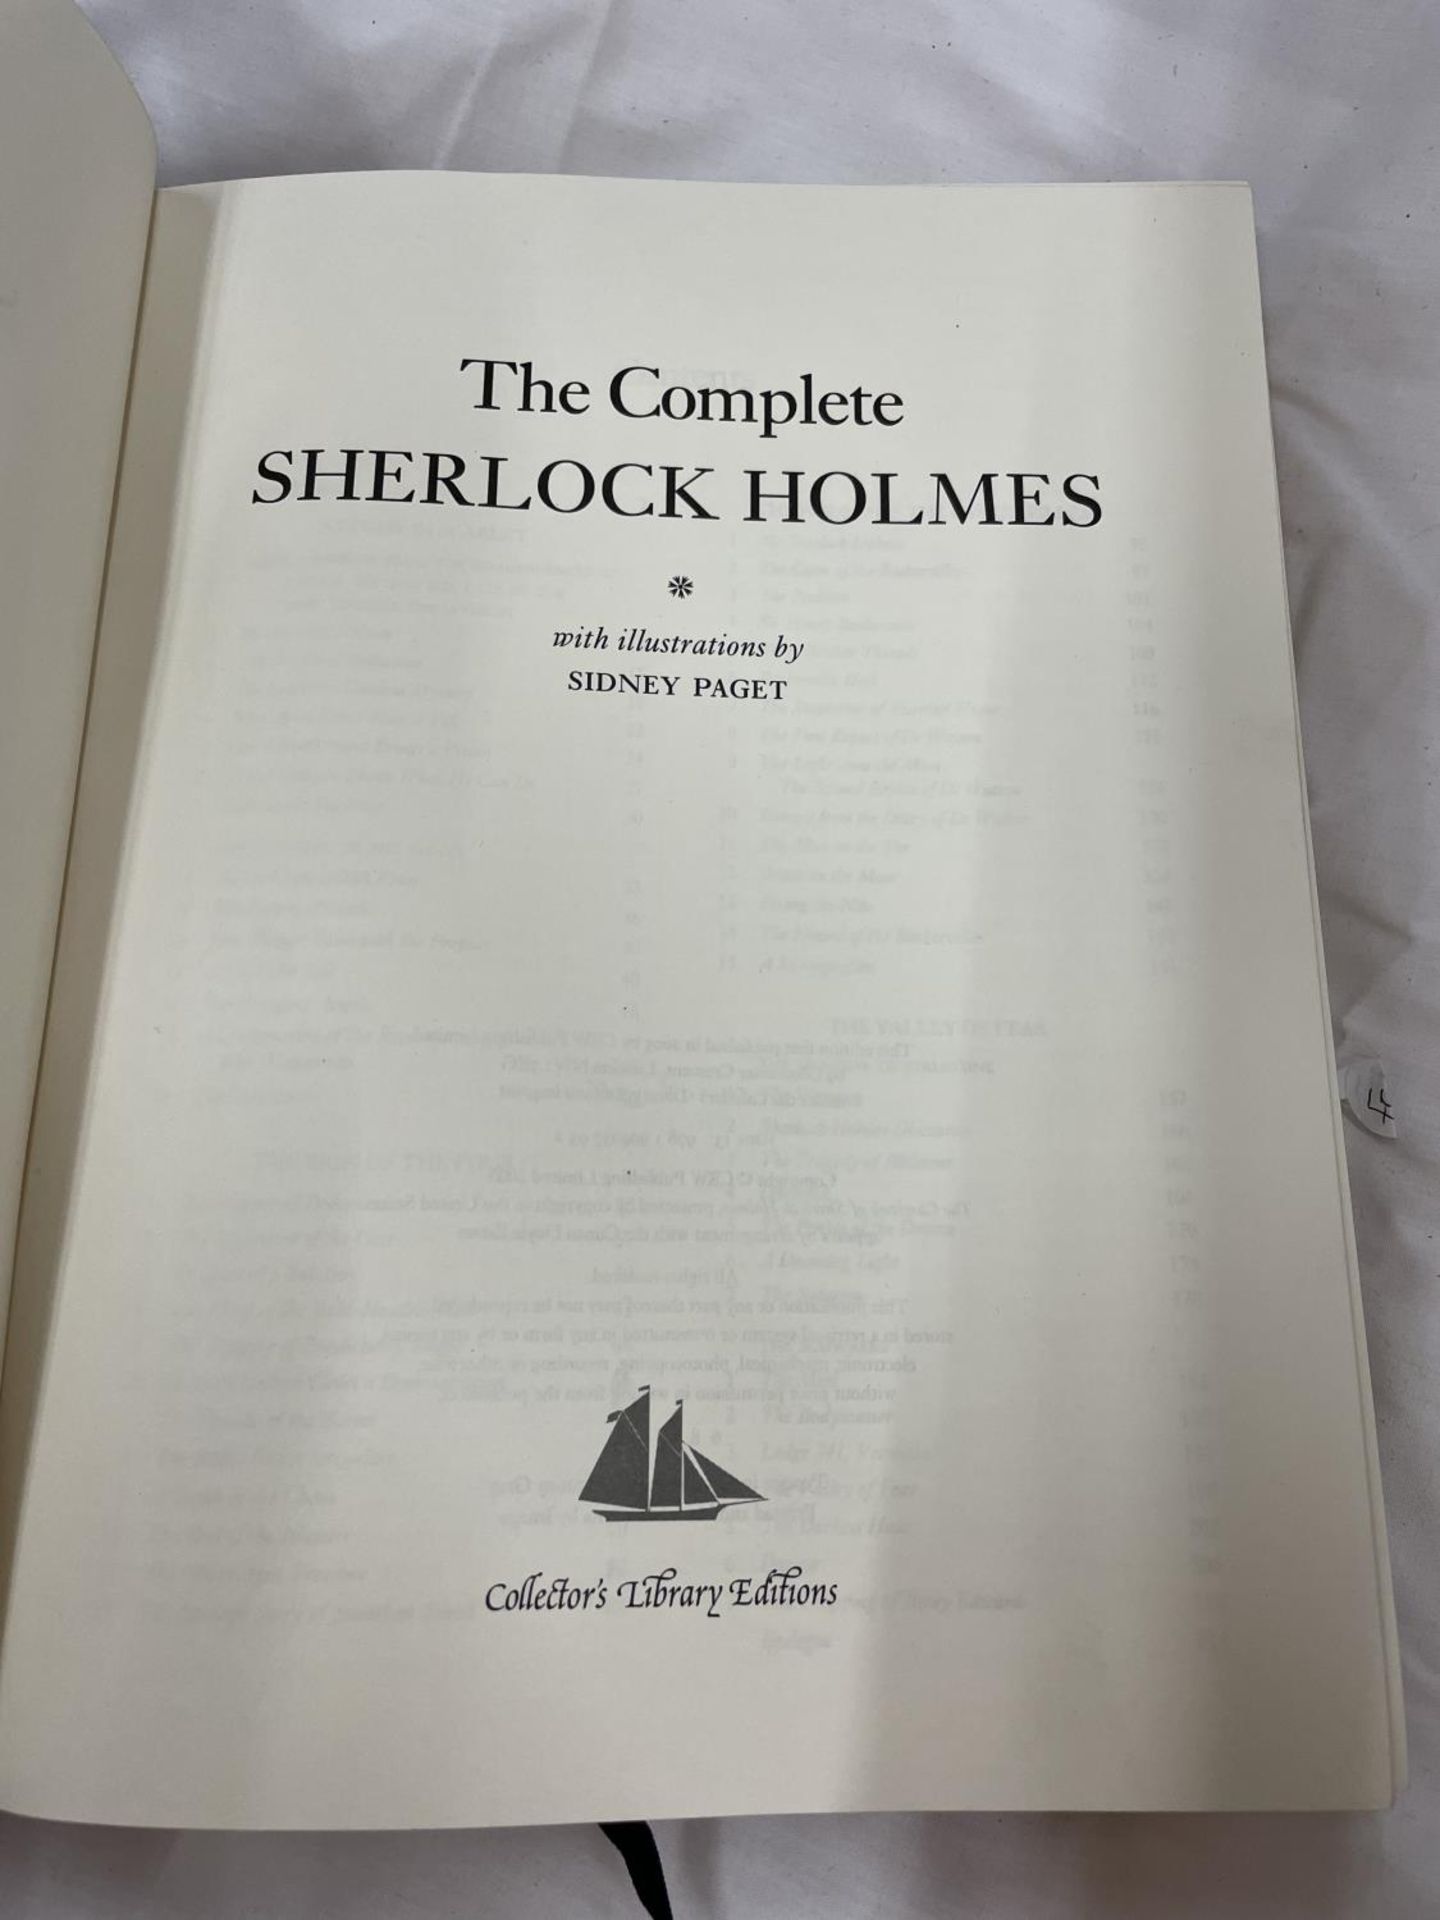 A COPY OF THE COMPLETE SHERLOCK HOLMES, AUTHOR SIR ARTHUR CONAN DOYLE, PUBLISHED BY COLLECTORS' - Image 2 of 5